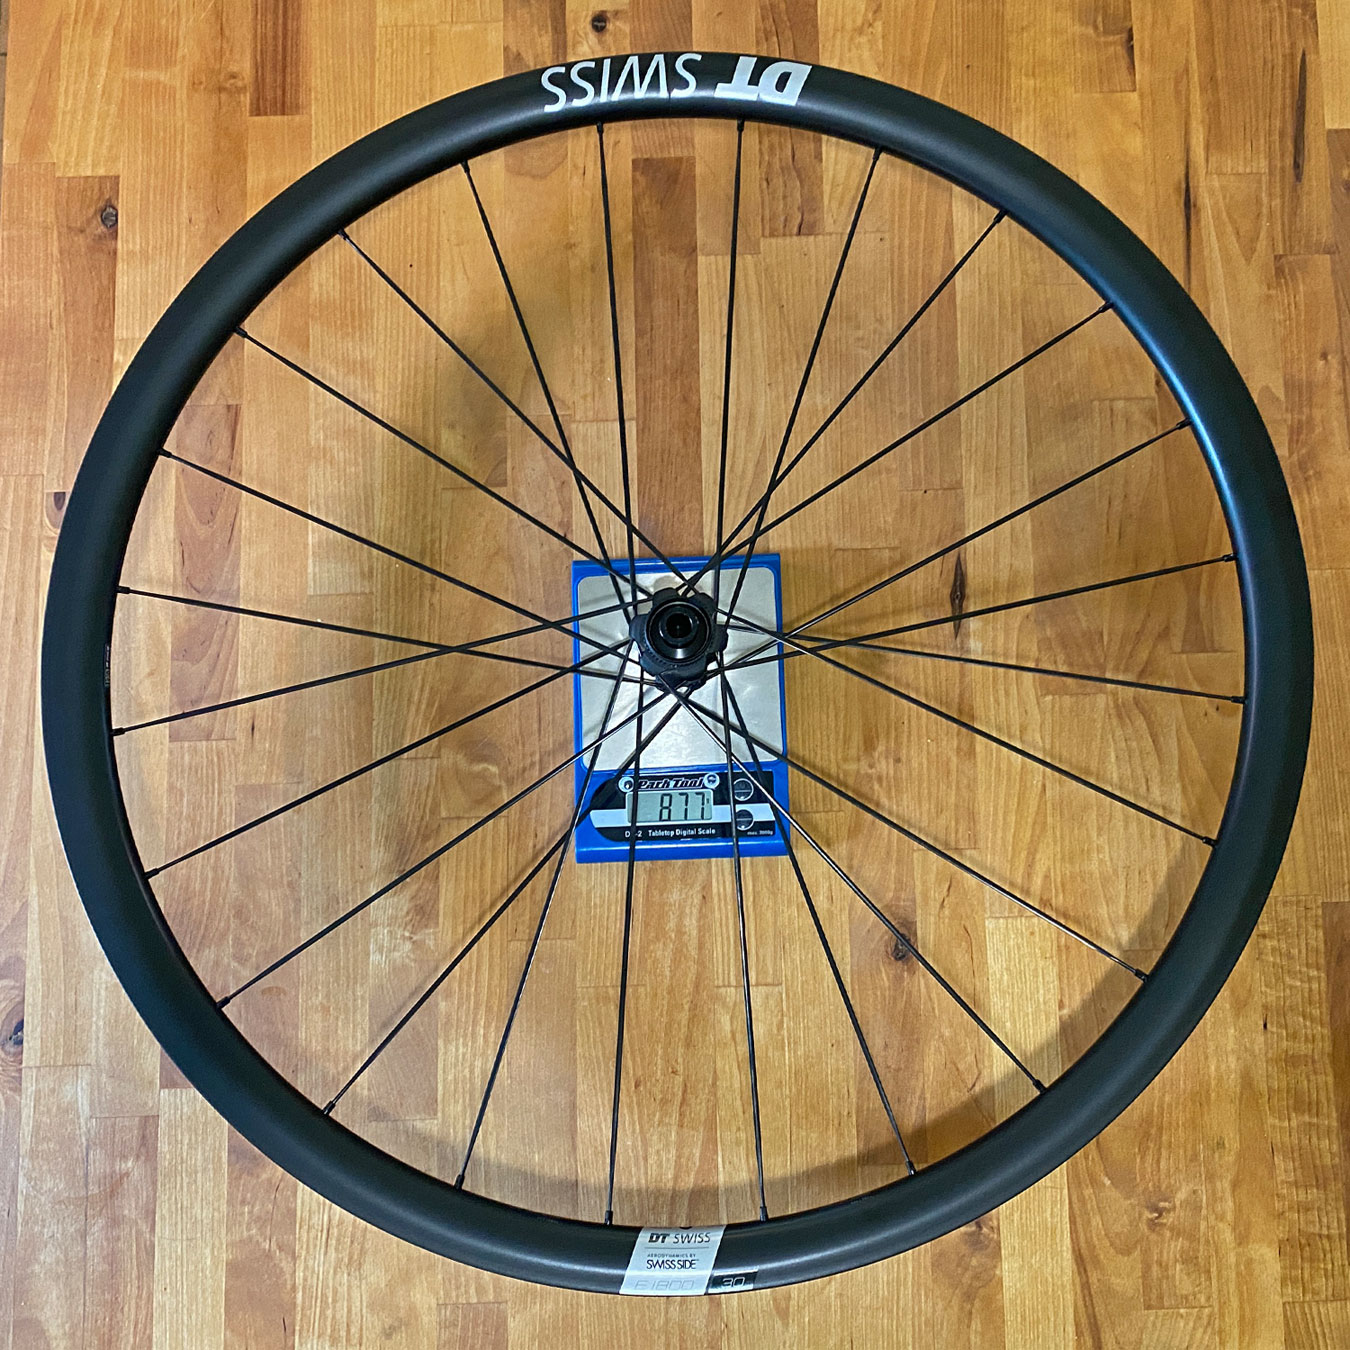 DT Swiss E 1800 Review affordable aero aluminum alloy endurance all-road wheels, 877g actual weight front